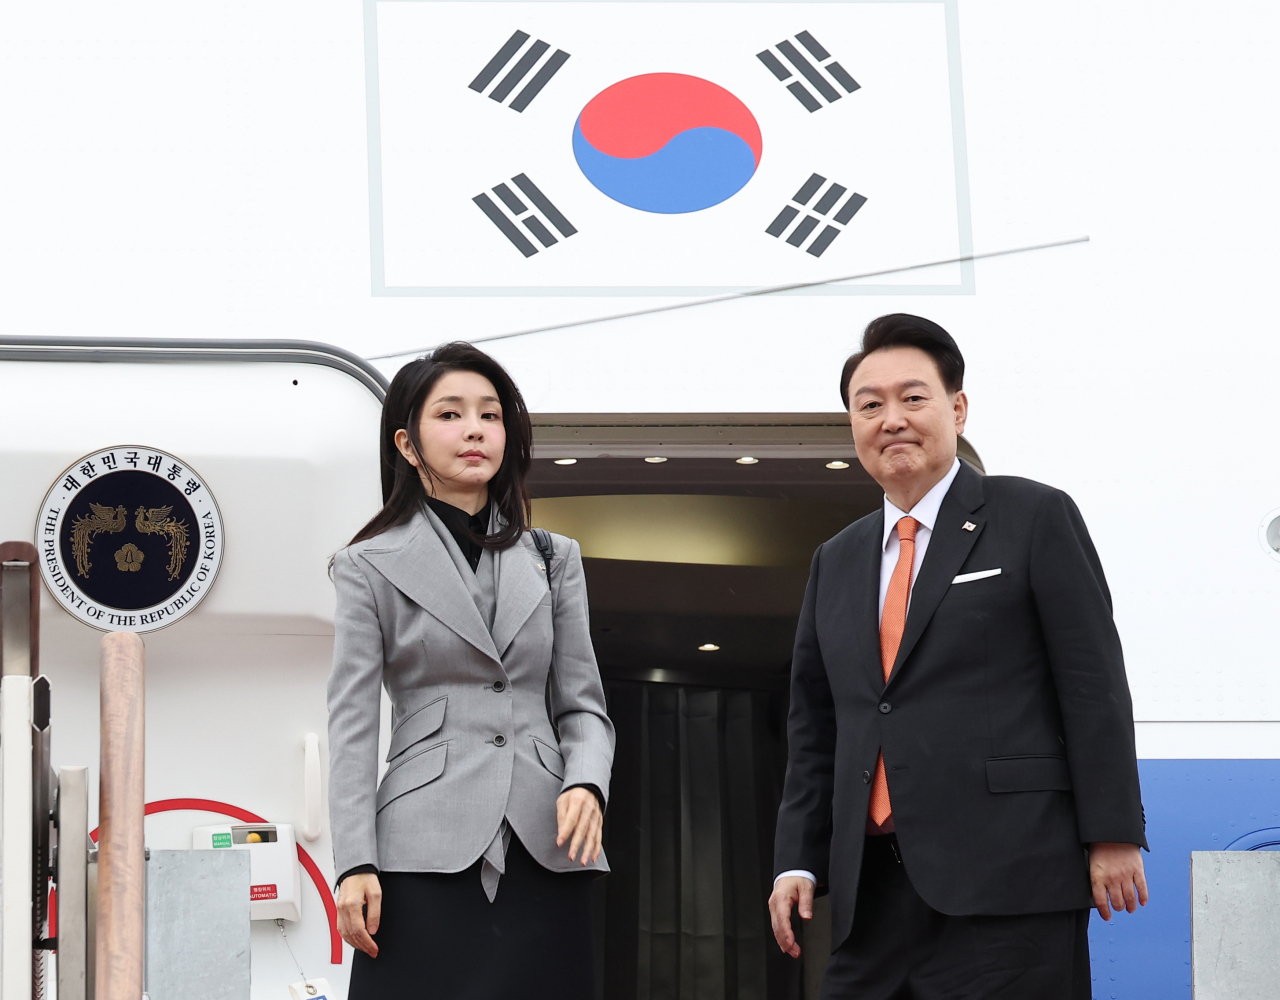 President Yoon Suk Yeol (right) and first lady Kim Keon Hee embark on Air Force One, as the couple departed Seoul Air Base in Seongnam, Gyeonggi Province, to fly to the Netherlands for a state visit on Monday. (Yonhap)